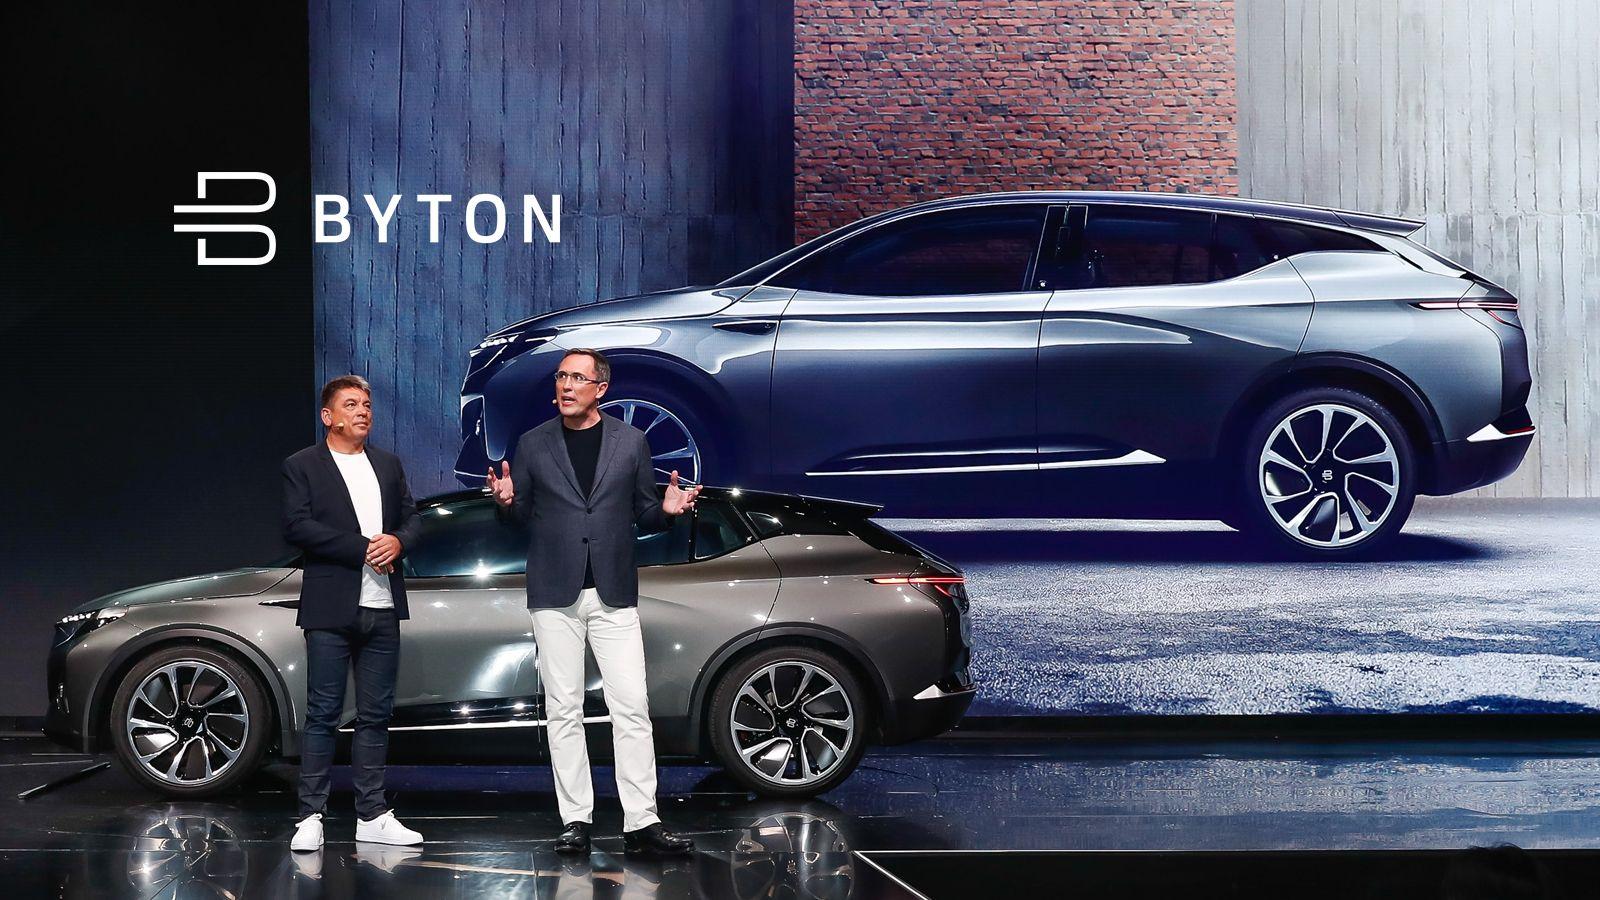 Byton Motor Logo - Get To Know BYTON Concept — The World's First Smart Intuitive Vehicle